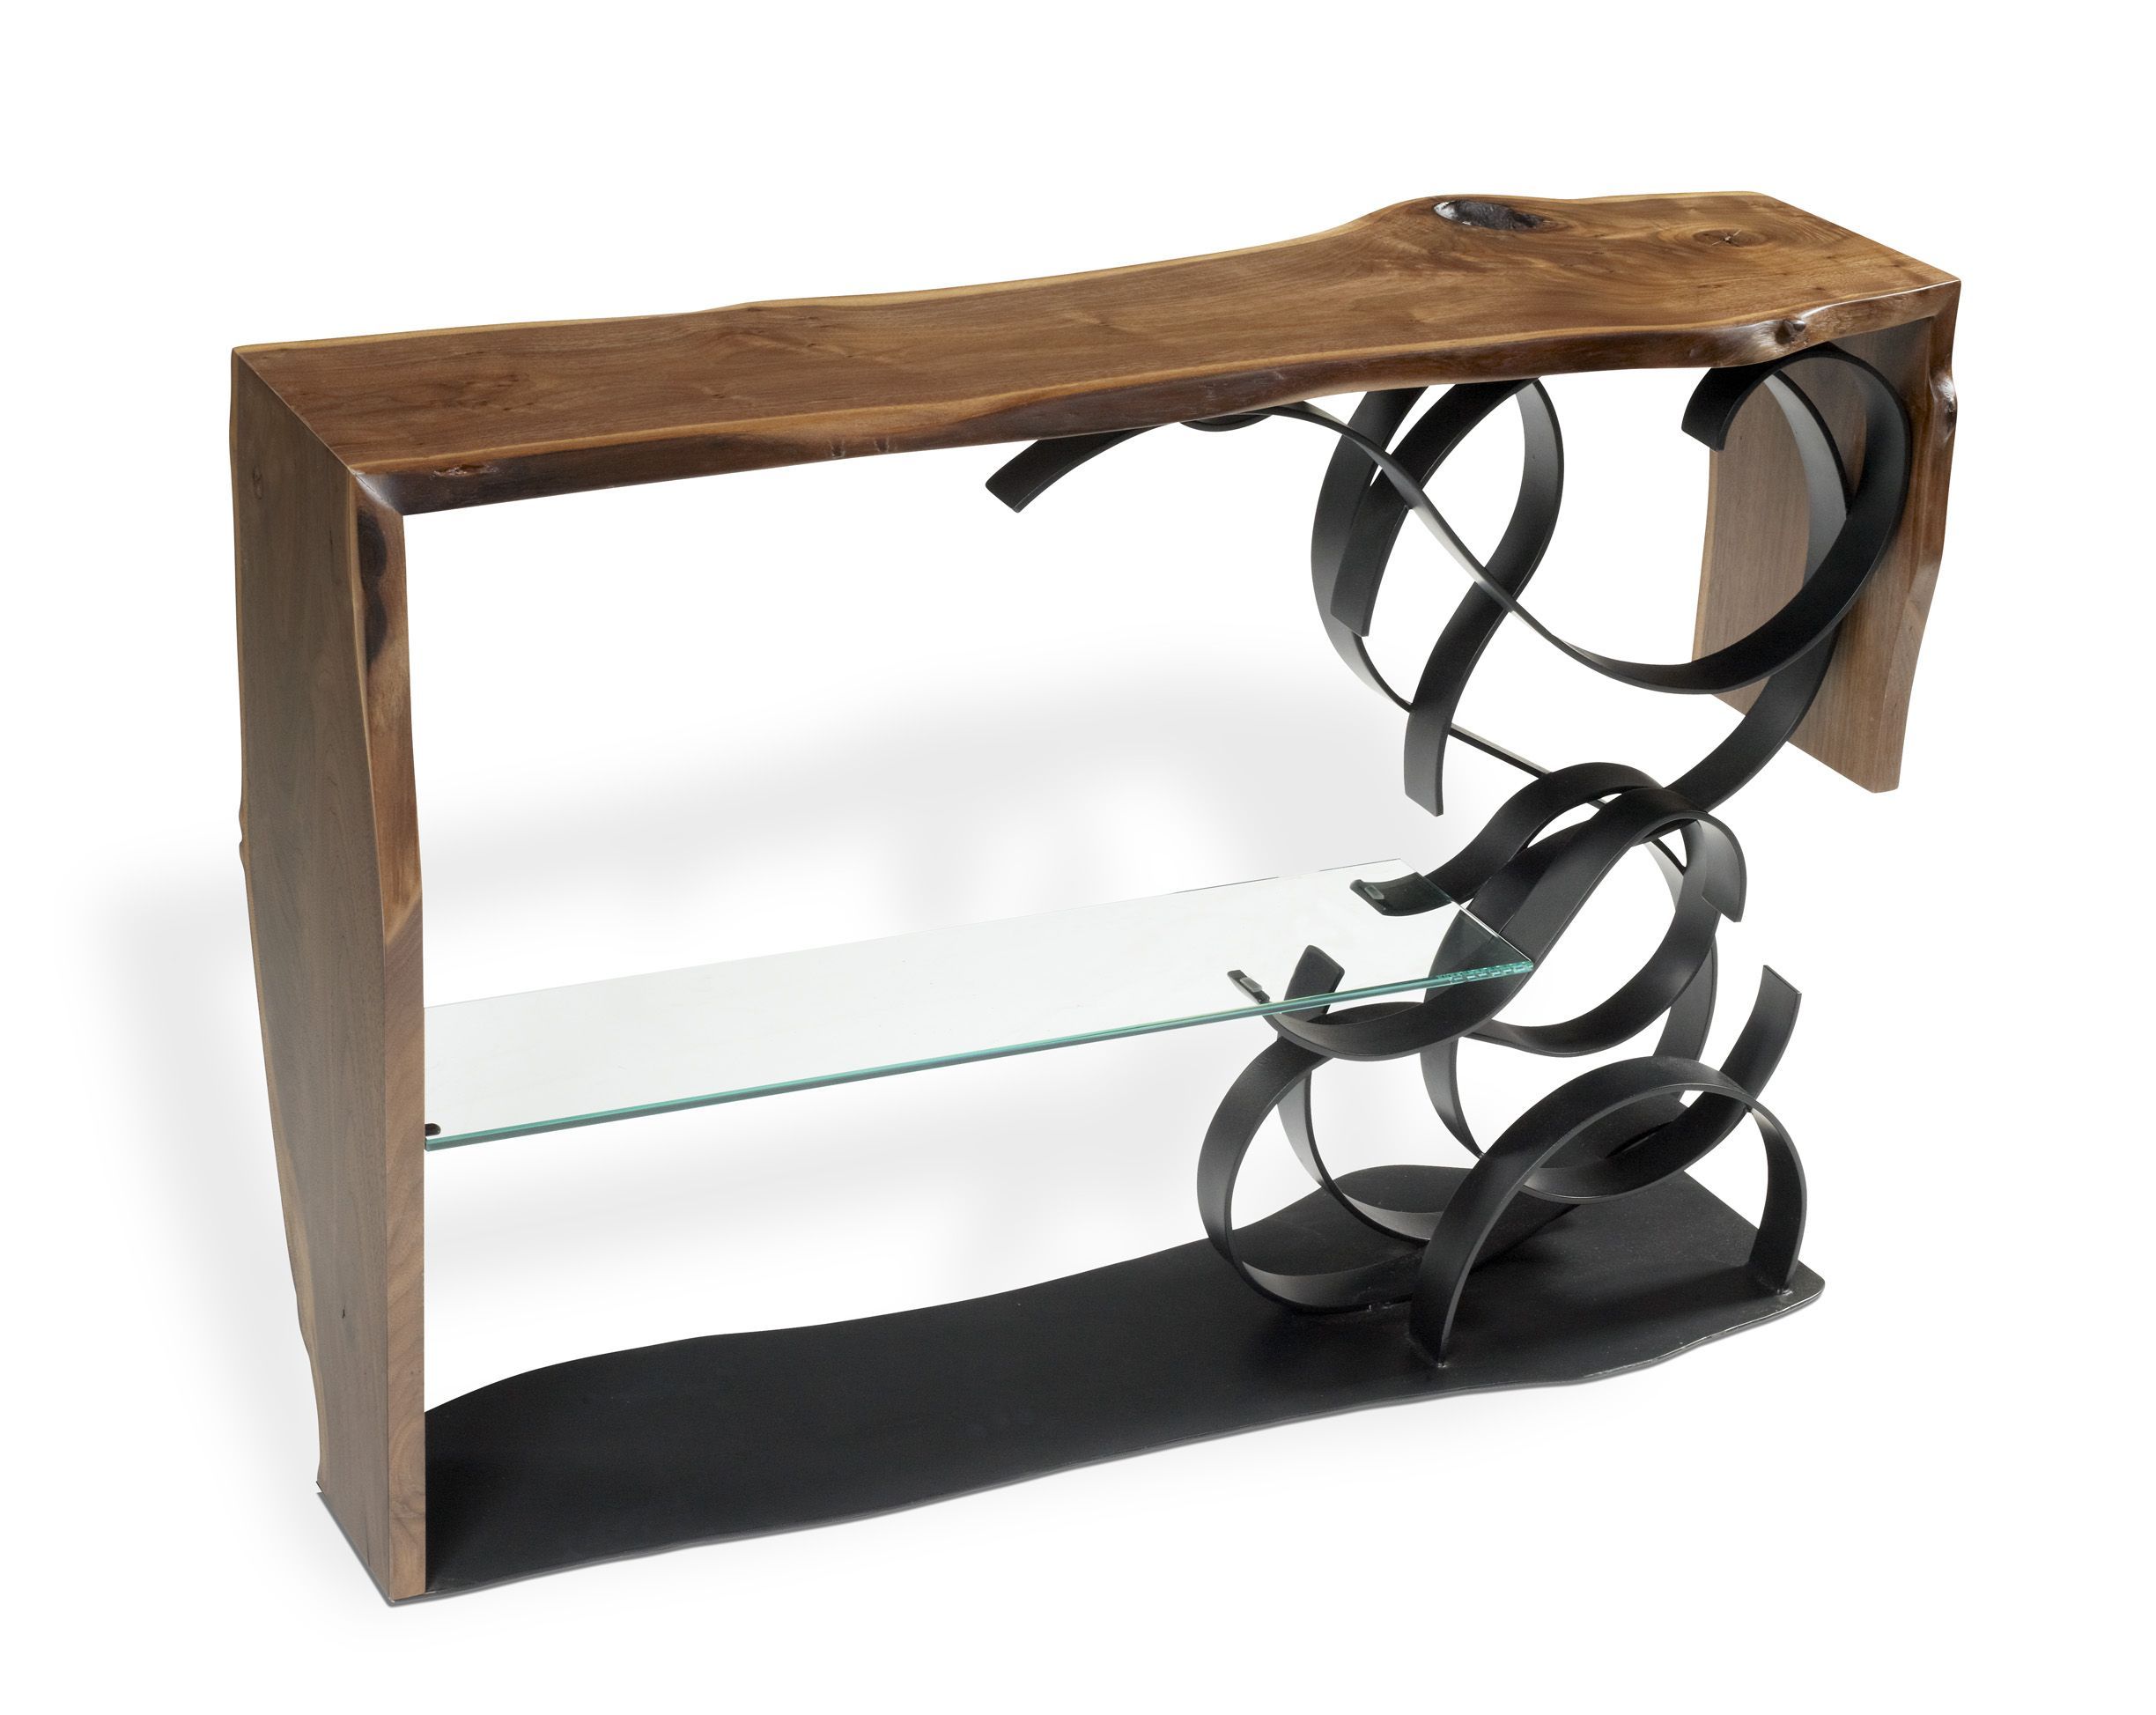 Black Walnut Sofa Table With Hand Forged Metal And Glass Shelf Regarding Walnut Wood And Gold Metal Console Tables (View 5 of 20)